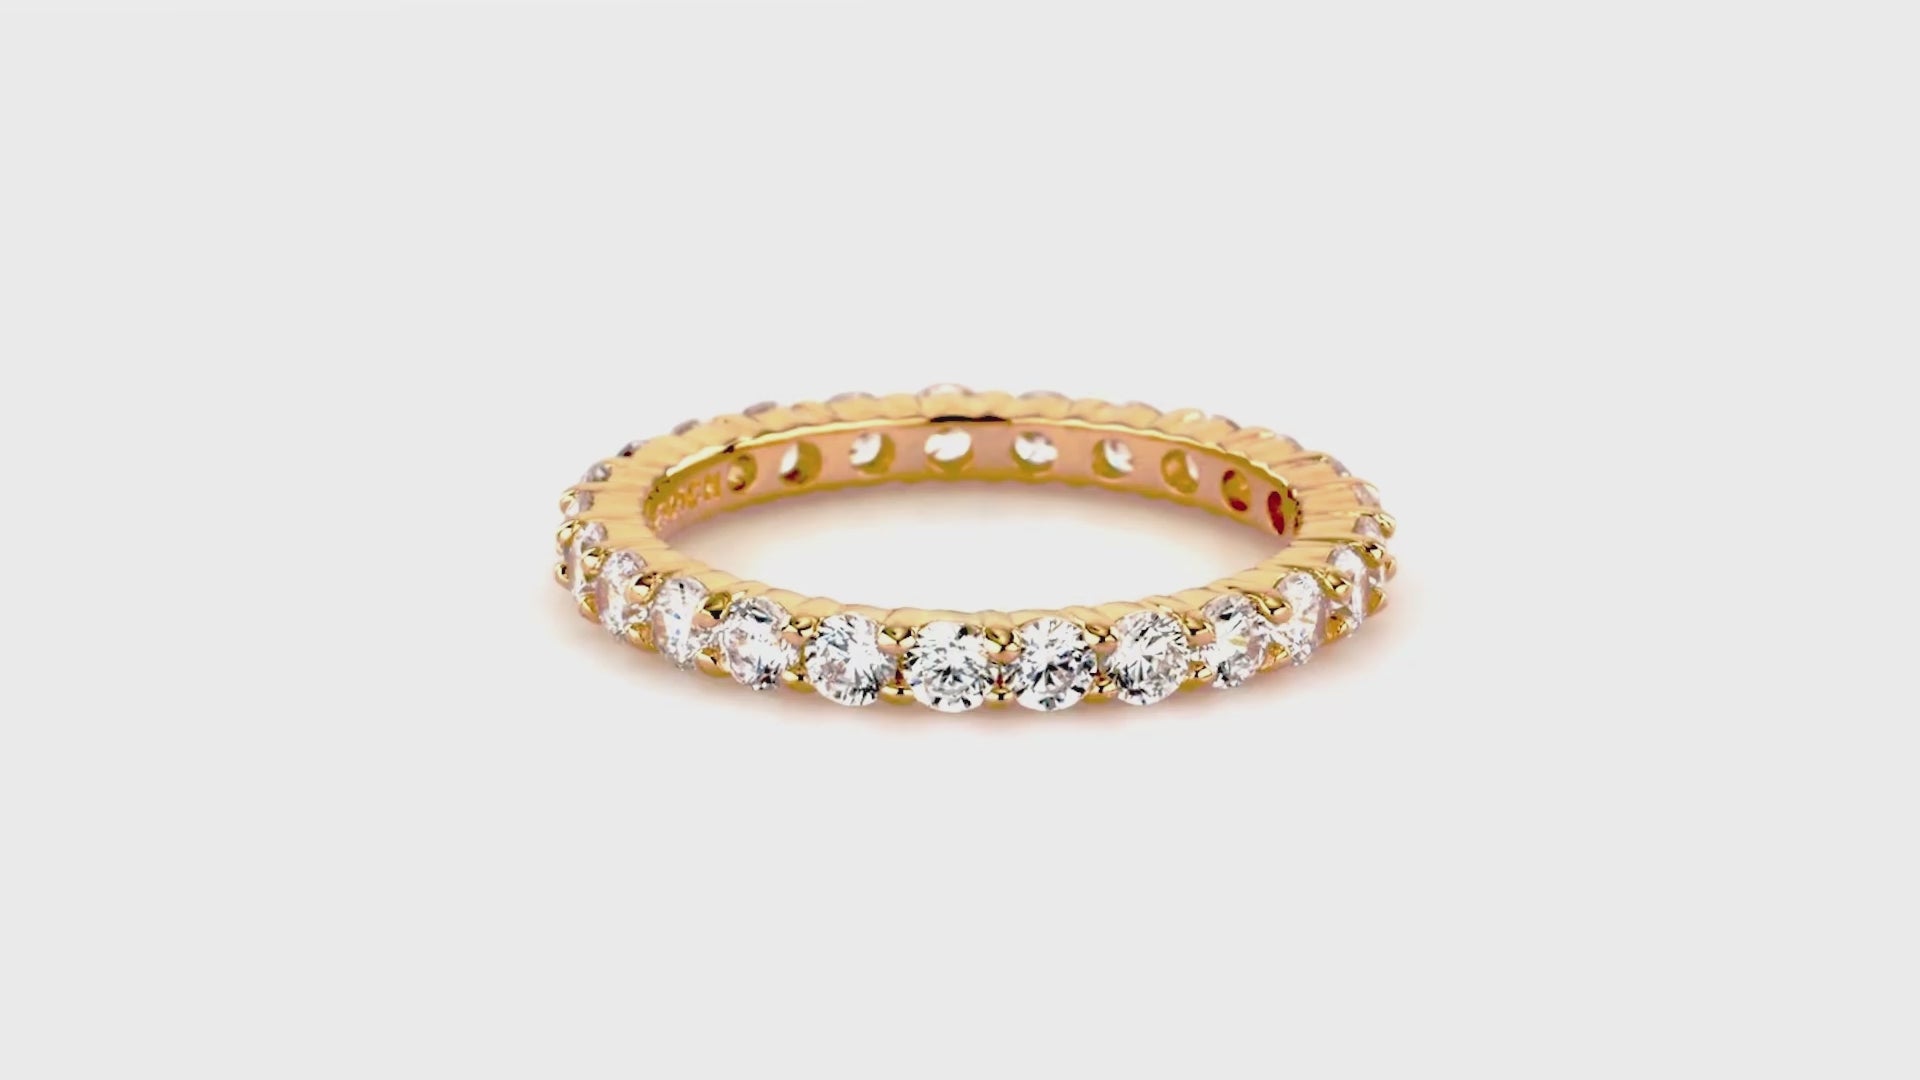 Video Contains Pave Set CZ Eternity Ring in Gold Flashed Sterling Silver. Style Number R448-25-G